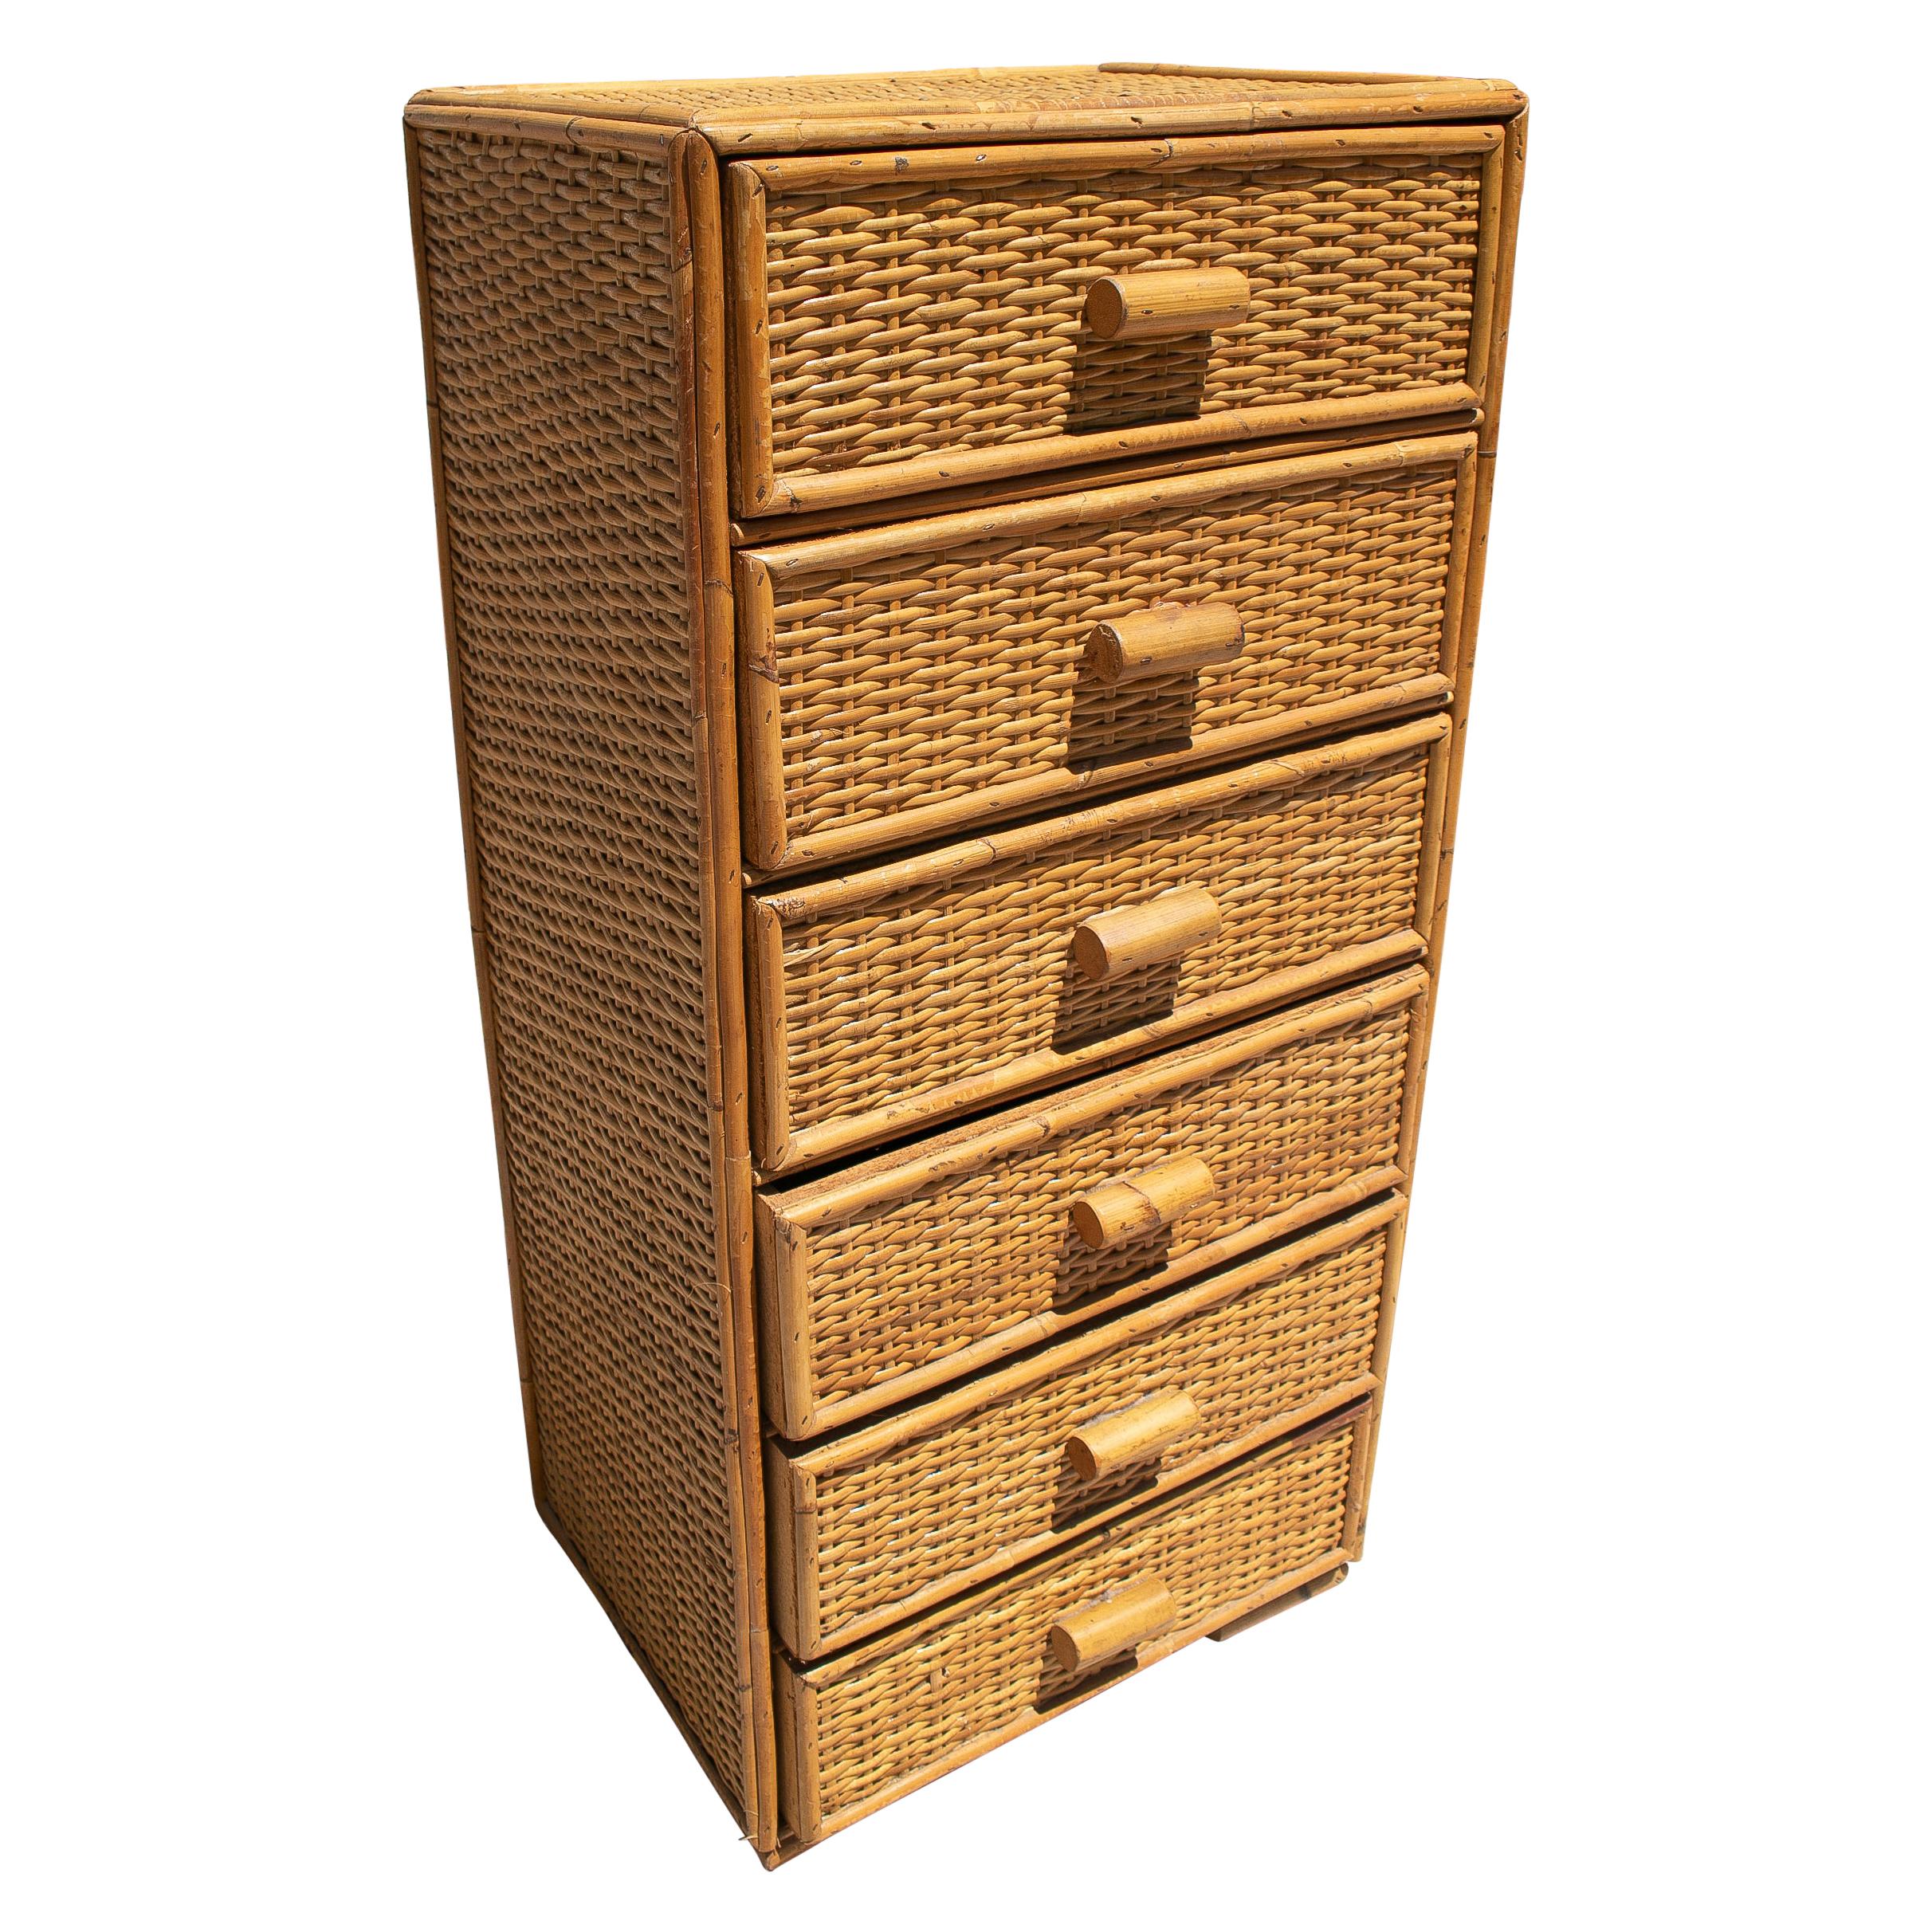 1970s Spanish Lace Wicker 6-Drawer Tall Chest